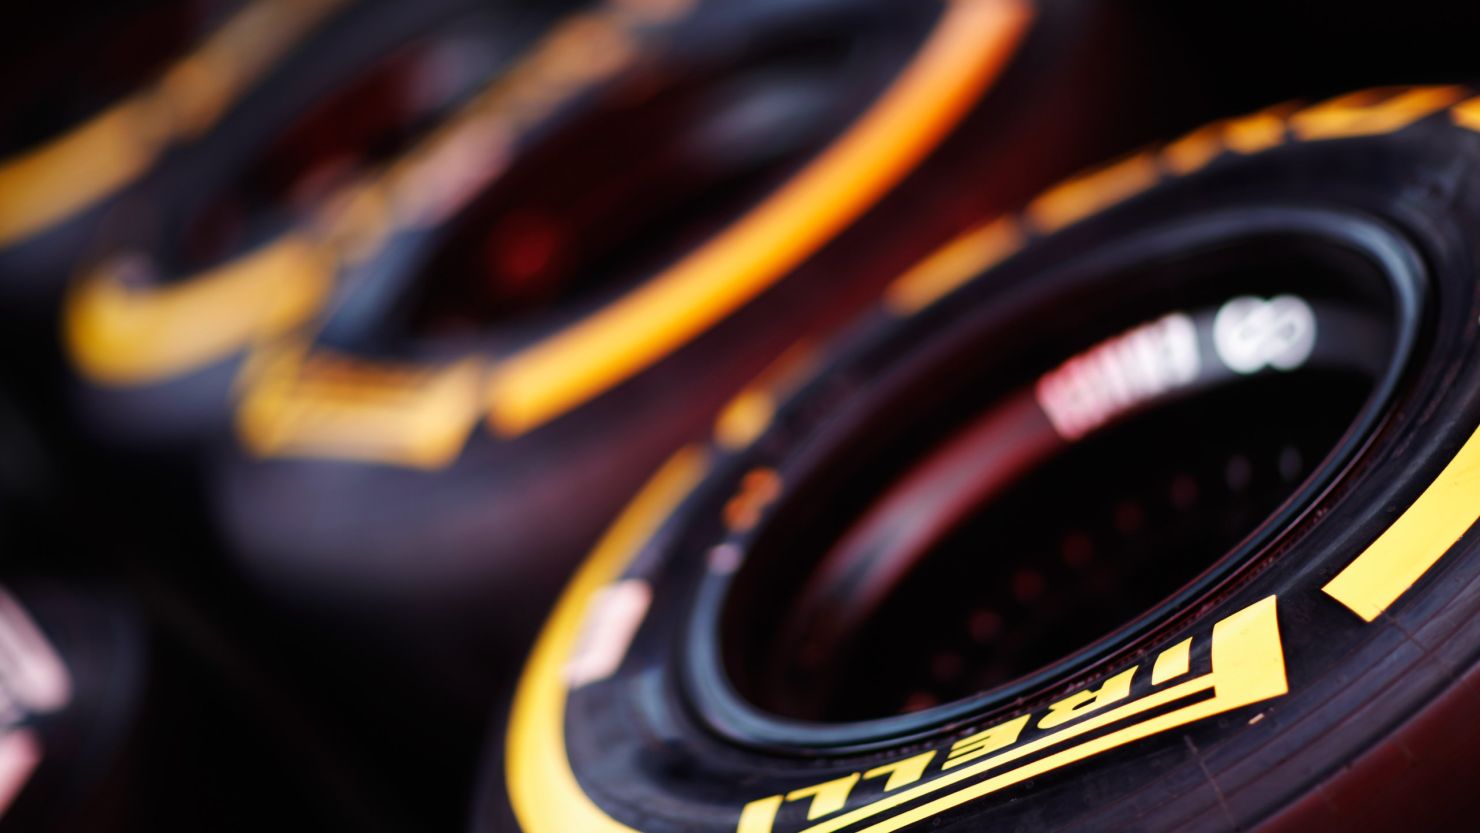 Italian tire manufacturer Pirelli say a redesign of their tires aims to make Formula 1 even more exciting in 2013.